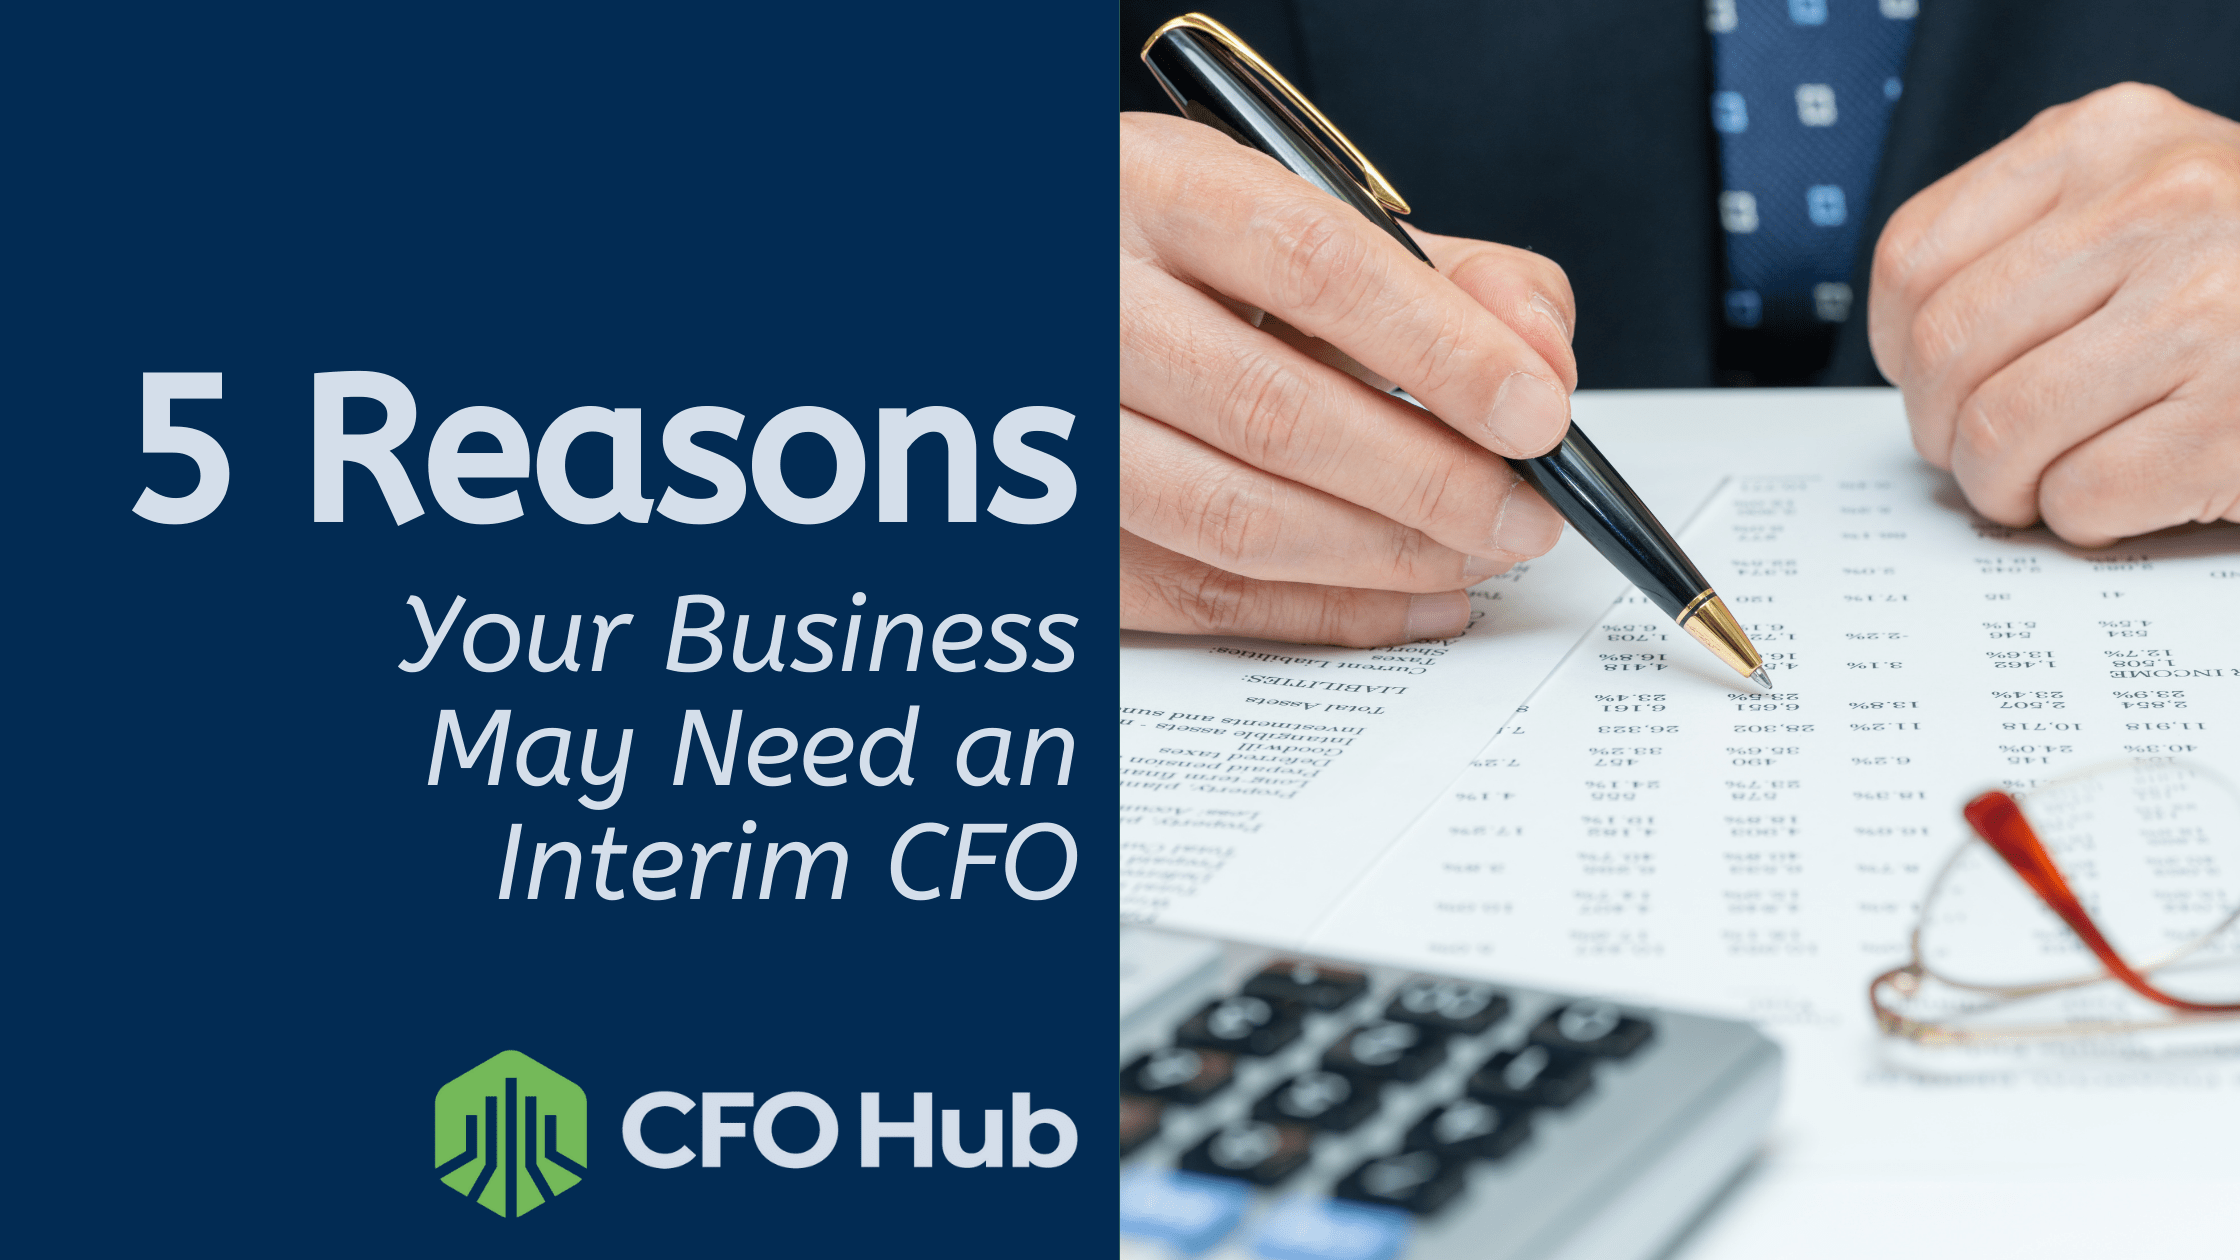 5 Reasons Your Business May Need an Interim CFO